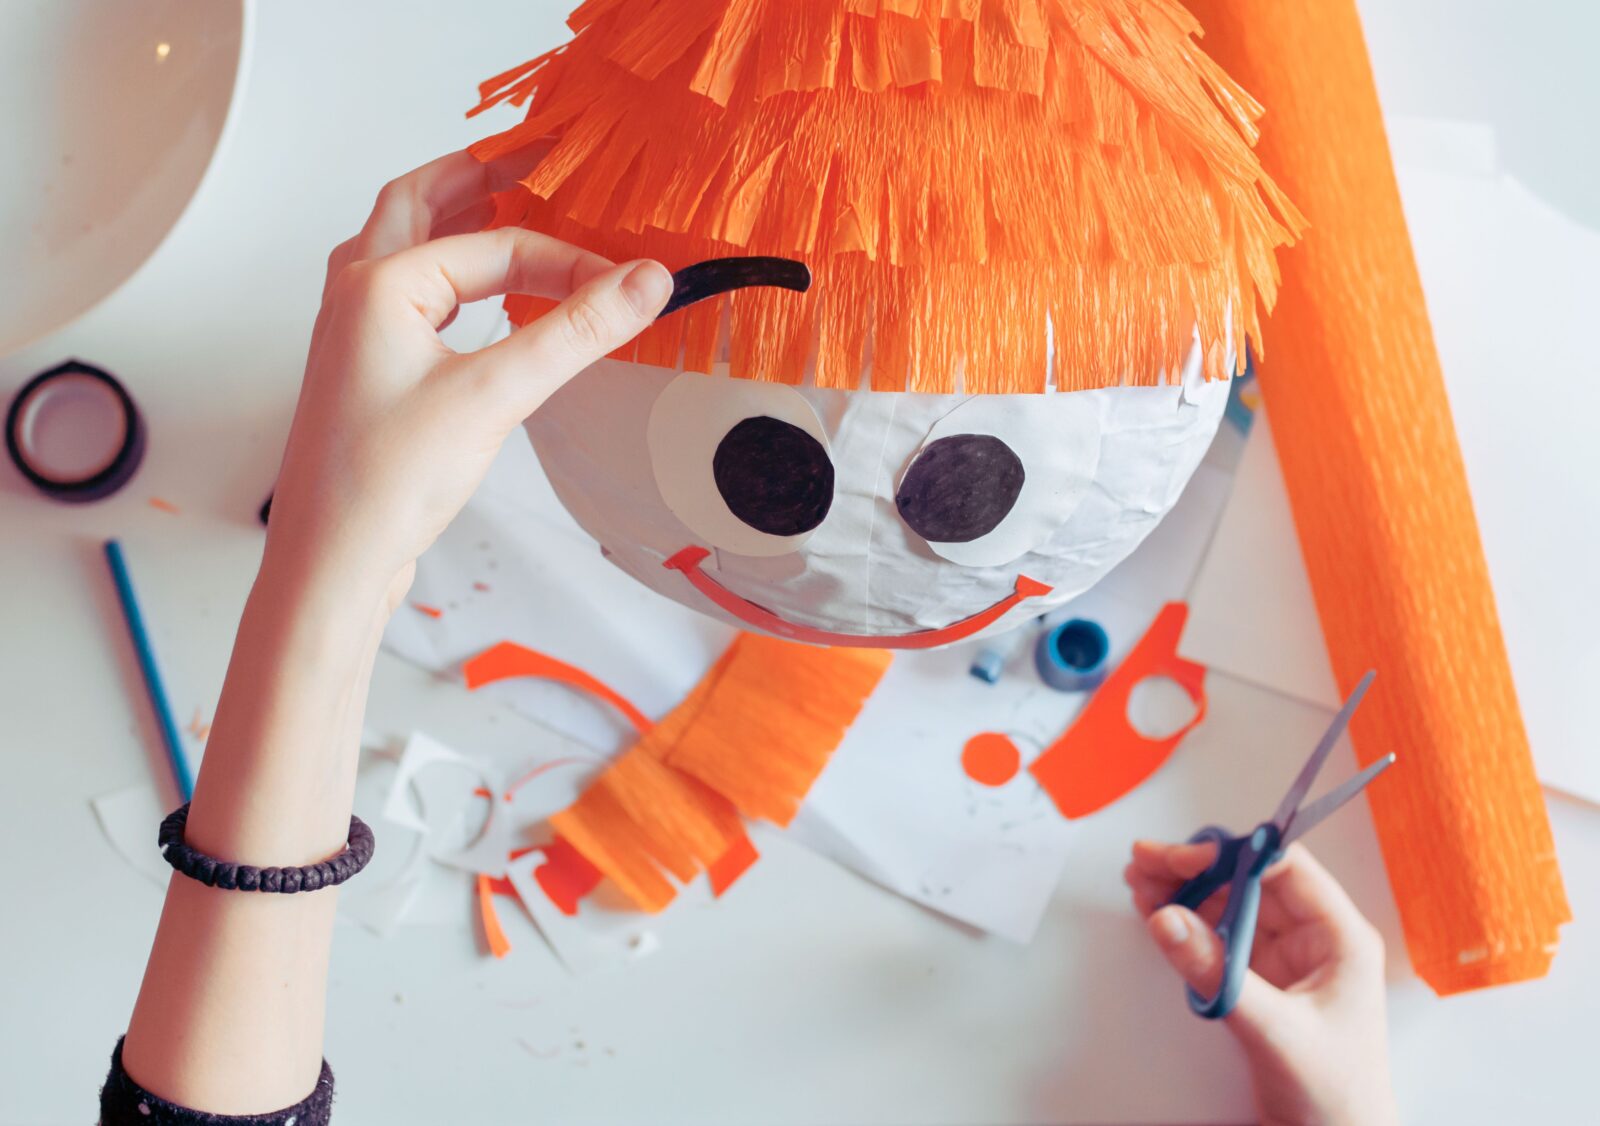 From Papyrus to Toilet Paper 🧻: This Is Likely the Hardest Quiz That’s All About Paper – Can You Pass It? paper mache papier mache pinata craft